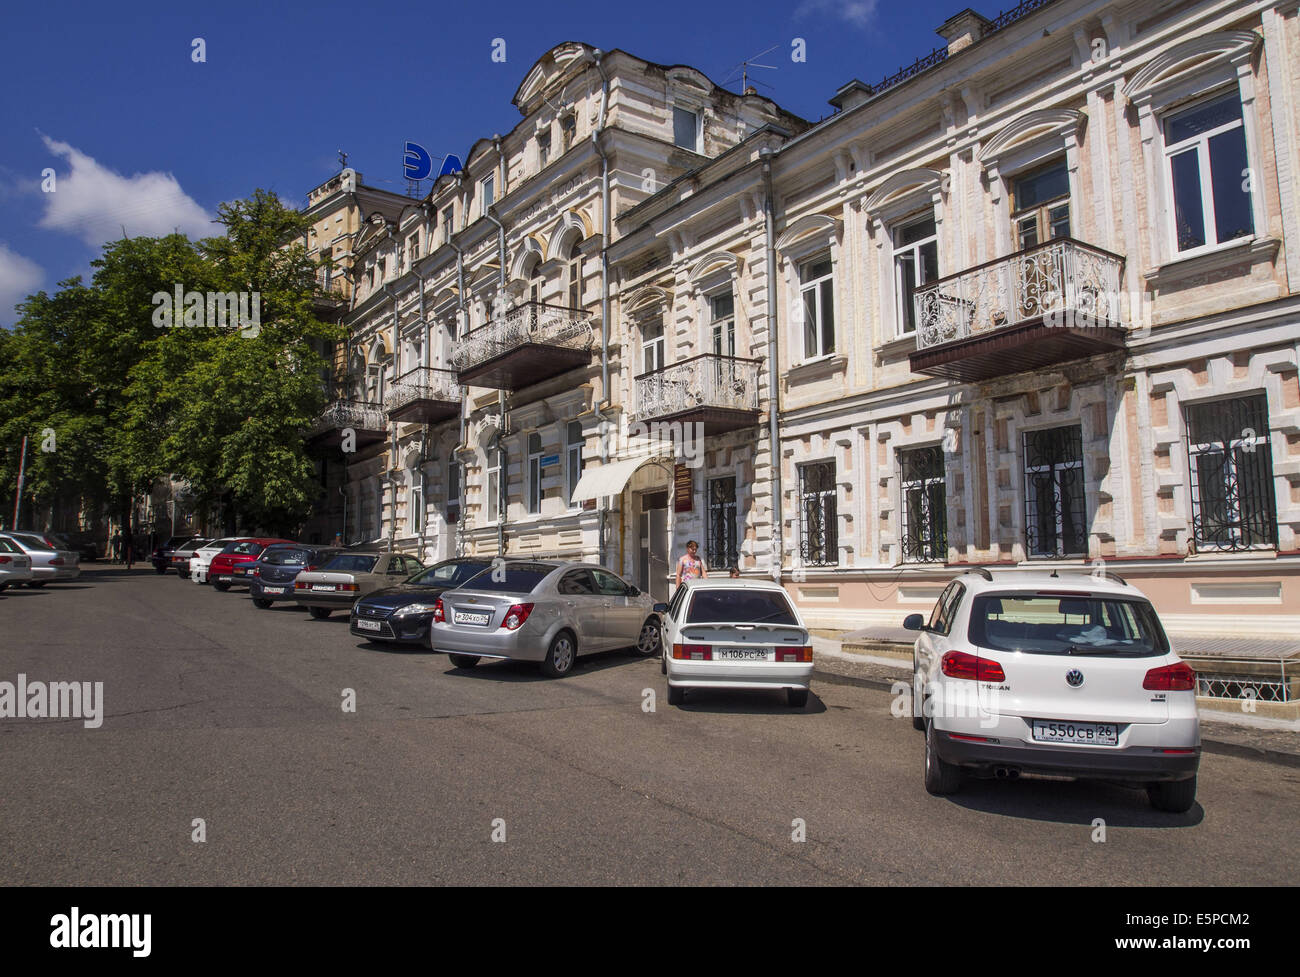 July 30, 2014 - The central part of Zheleznovodsk. Zheleznovodsk is a town in Stavropol Krai, Russia. Zheleznovodsk, along with Pyatigorsk, Yessentuki, Kislovodsk, and Mineralnye Vody, is a part of the Caucasus Mineral Waters, a renowned Russian spa resort. The town economy revolves around sanatoria, where dozens of thousands of people from all over Russia and former Soviet republics come year-around to vacation and rest, as well as prevent and treat numerous stomach, kidney, and liver diseases. Dozens of spas operate in Russia's Caucasus Mountains region, exploiting the mineral springs in th Stock Photo